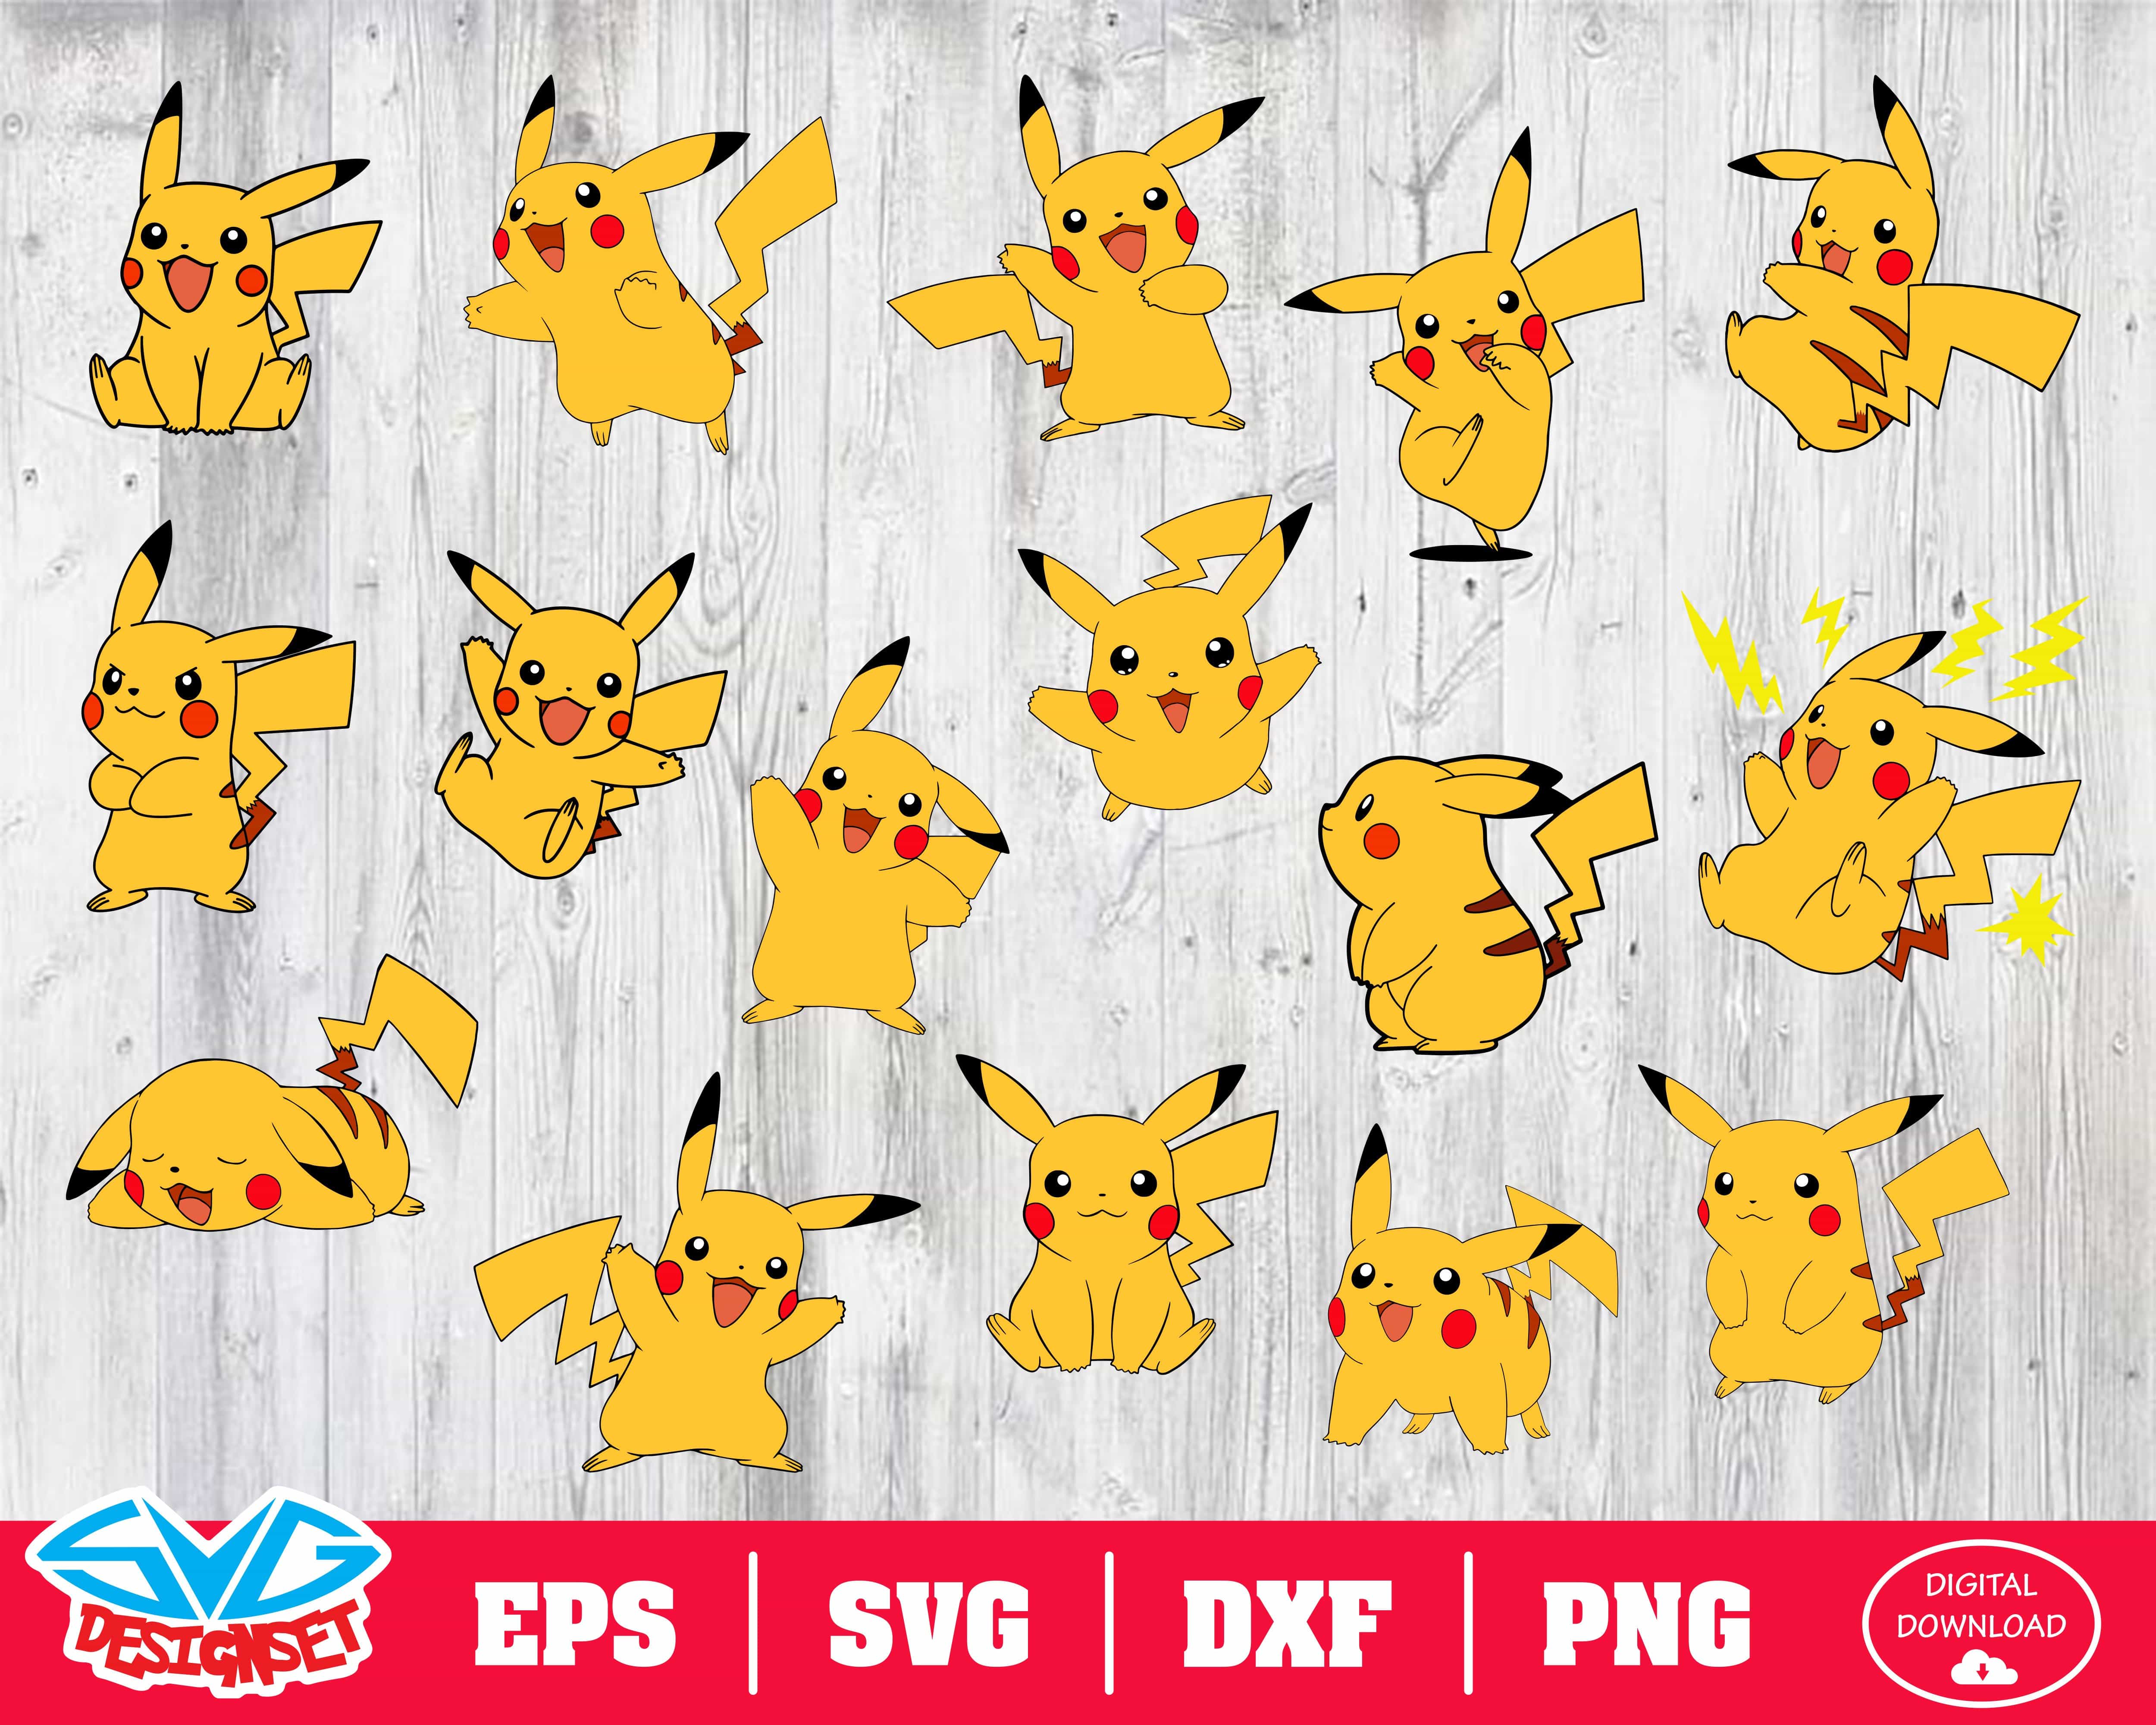 Download Pikachu Svg Dxf Eps Png Clipart Silhouette And Cutfiles